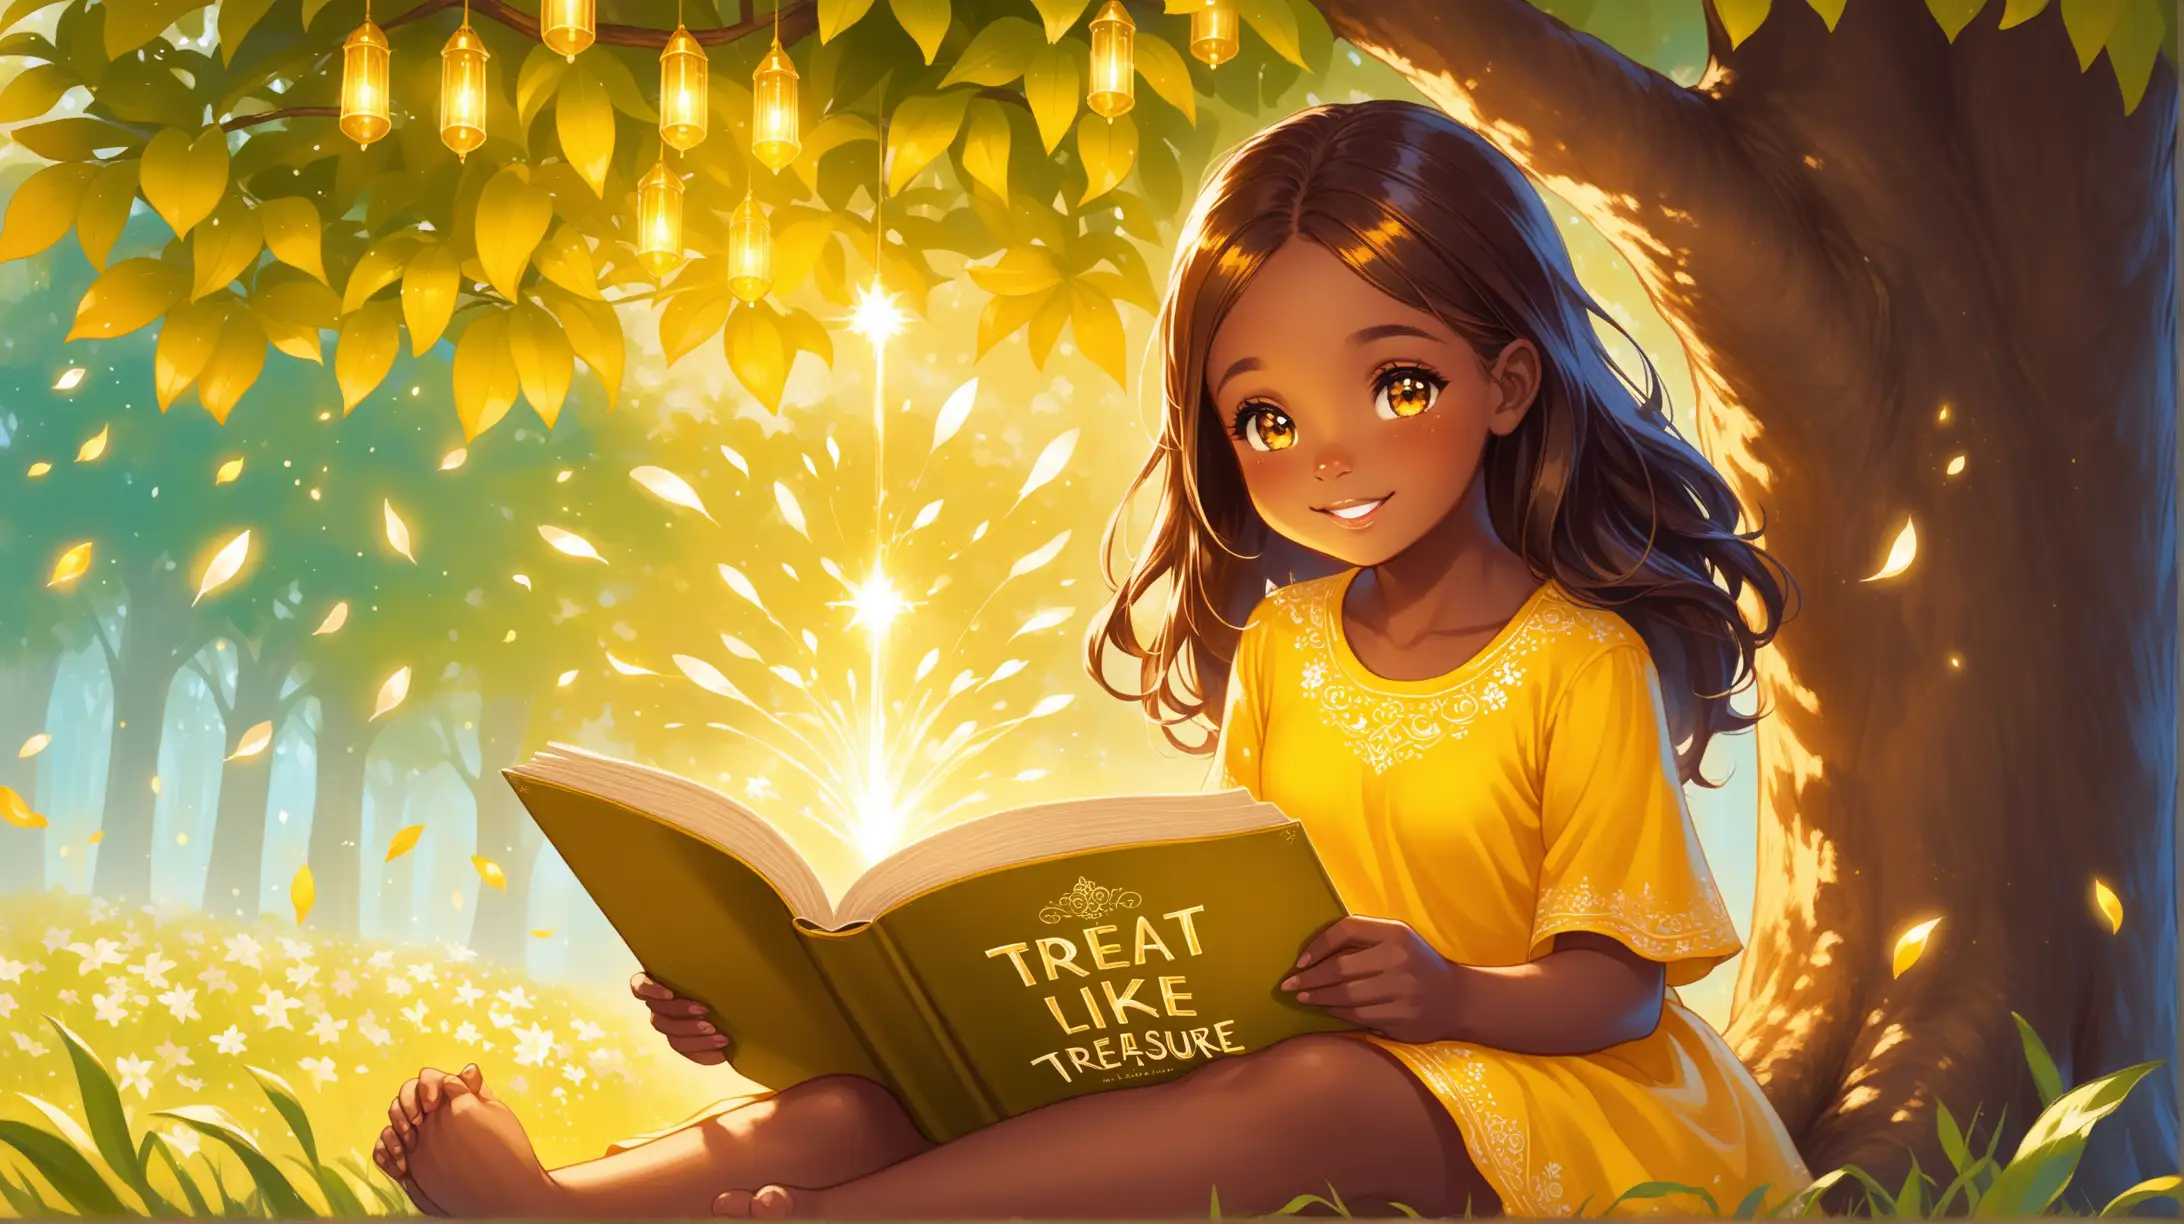 Kindhearted Girl Reading Book Treat Others Like Treasure Under Tree